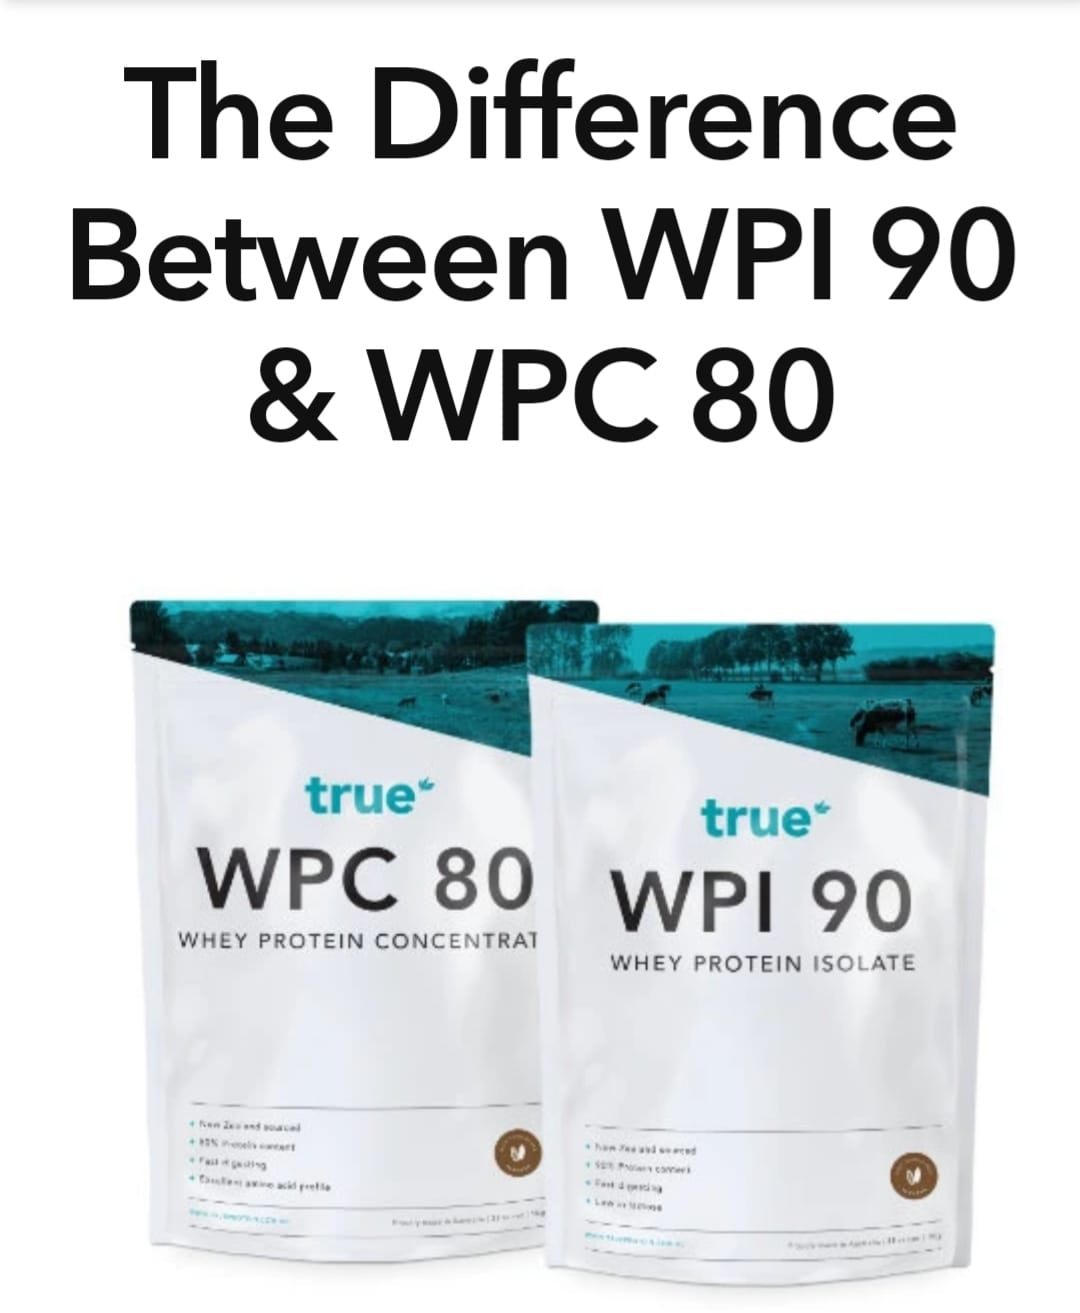 The difference between wpi 90 and wpc 80